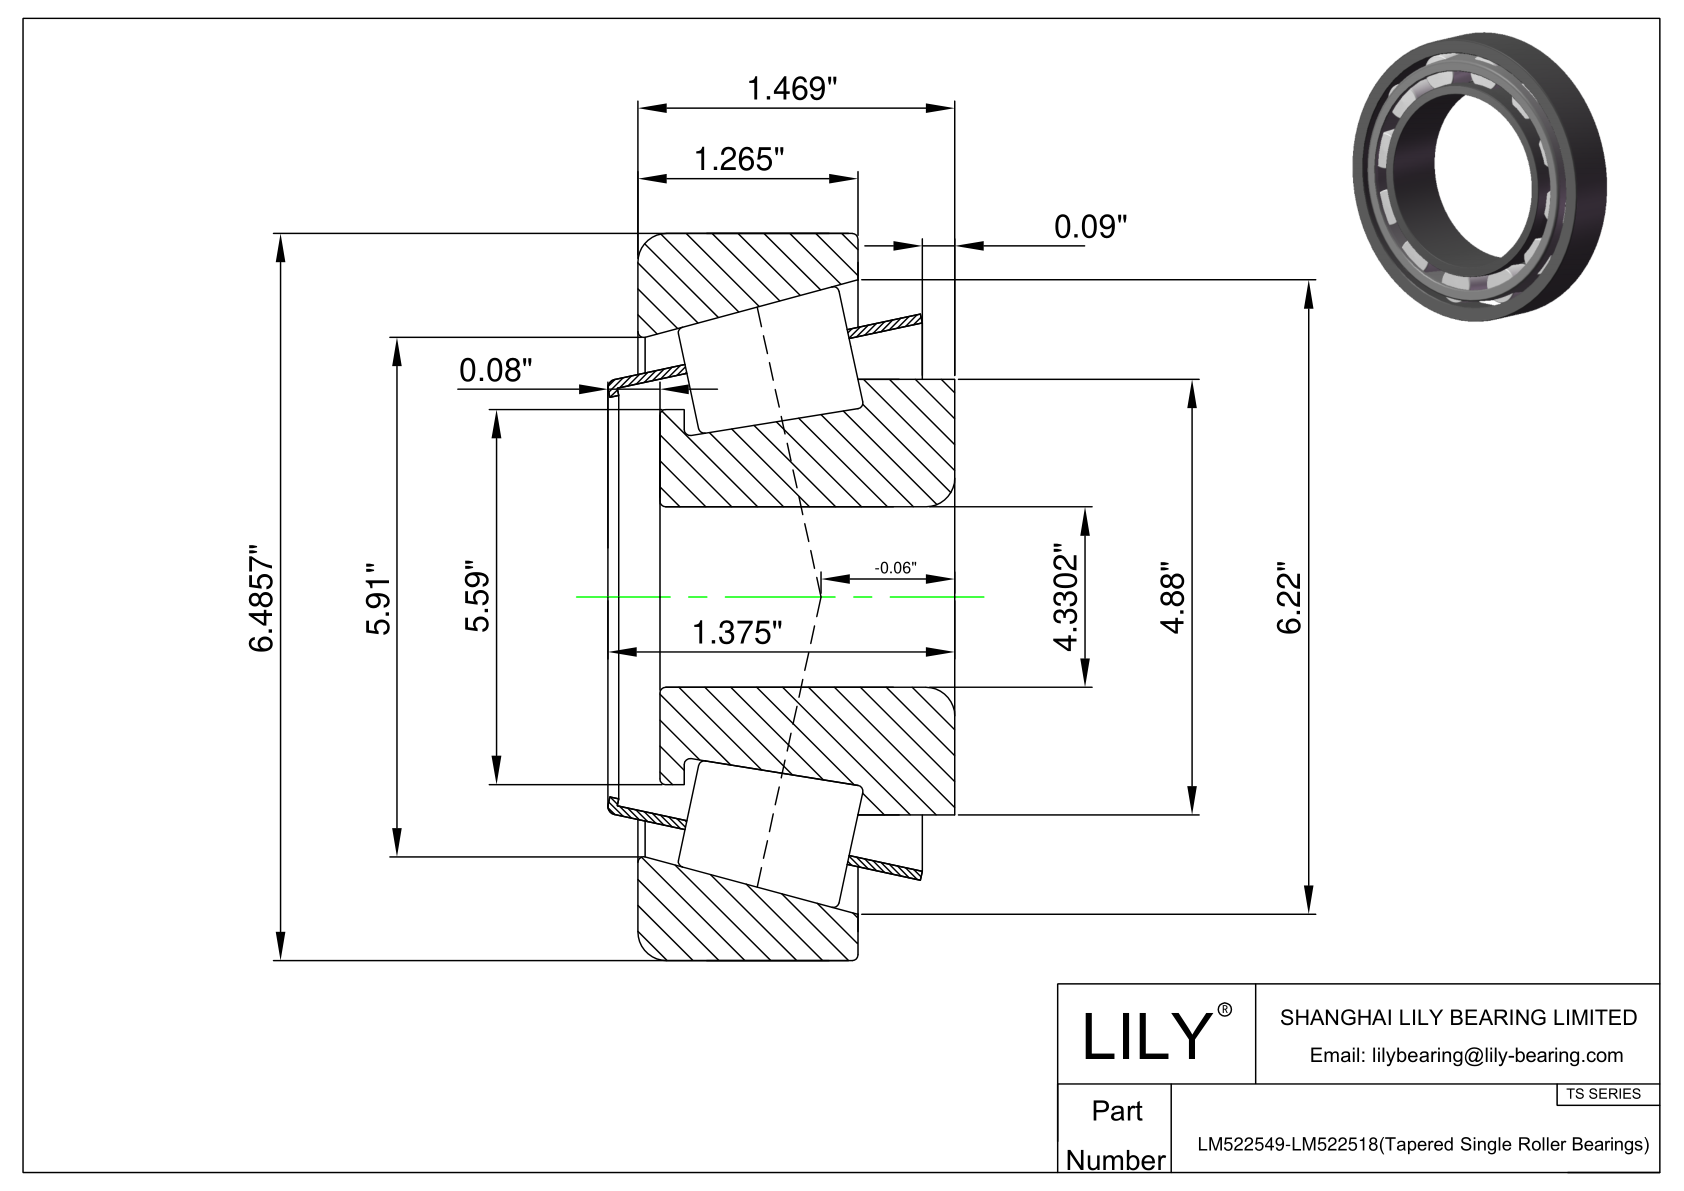 LM522549-LM522518 TS (Tapered Single Roller Bearings) (Imperial) cad drawing